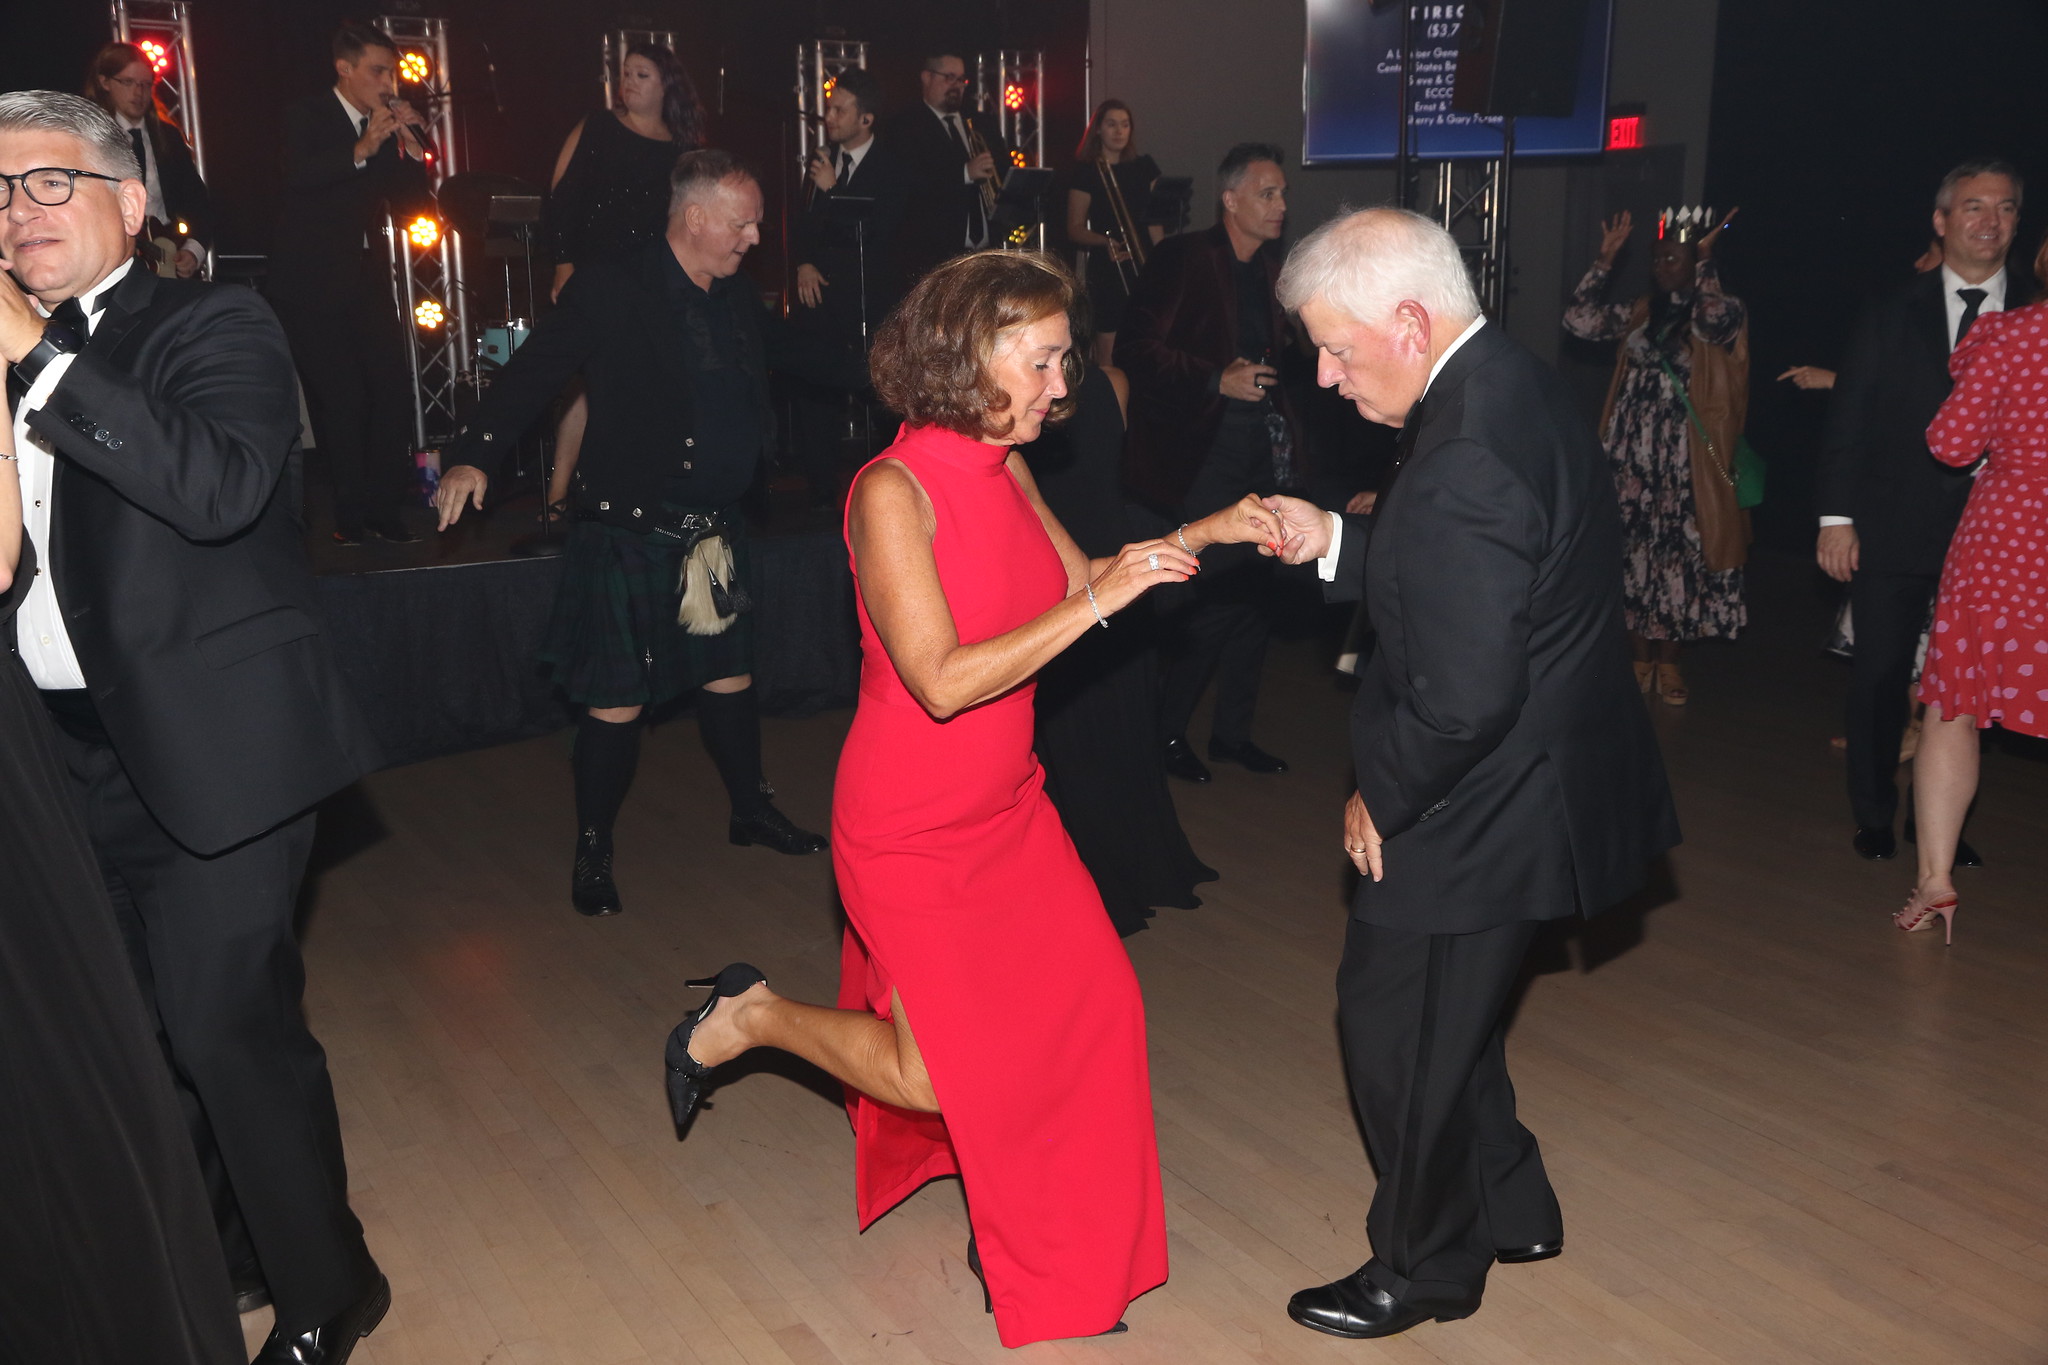 A woman in a red dress dancing lively with a man in a dark suit